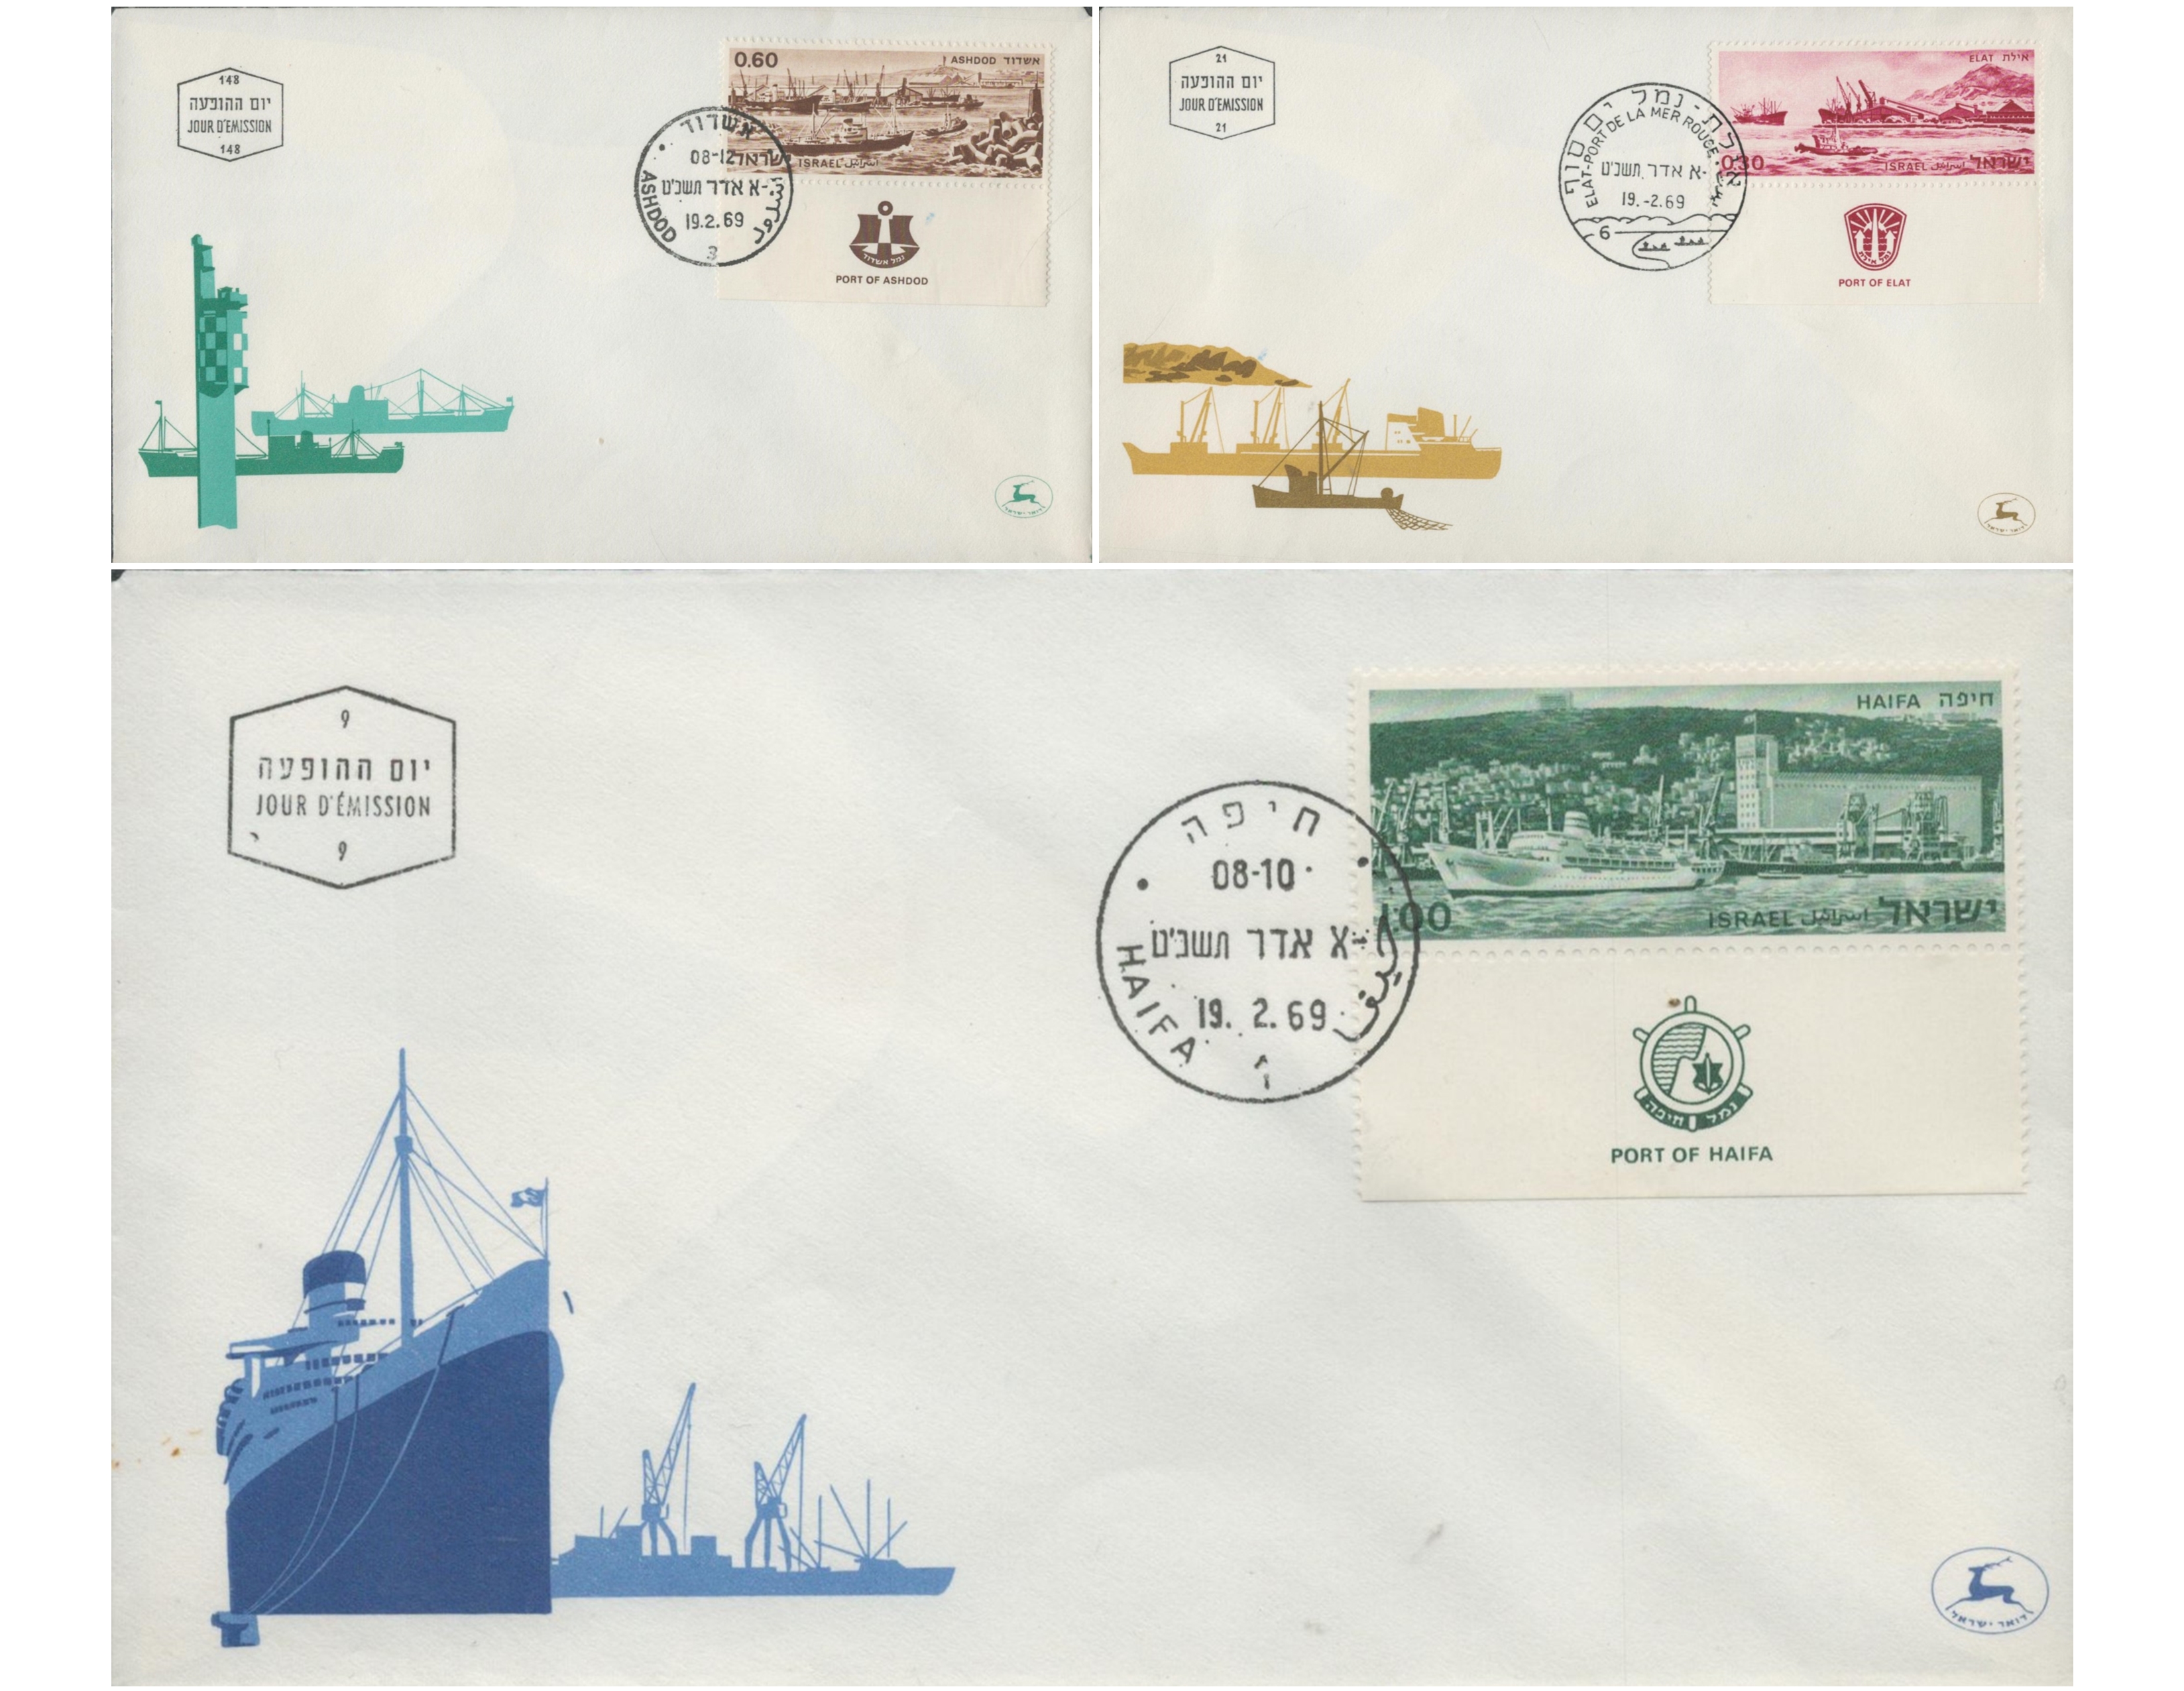 FDC collection, Port of Eilat FDC, Port of Ashdod FDC, Port of Haifa FDC. Good Condition. All